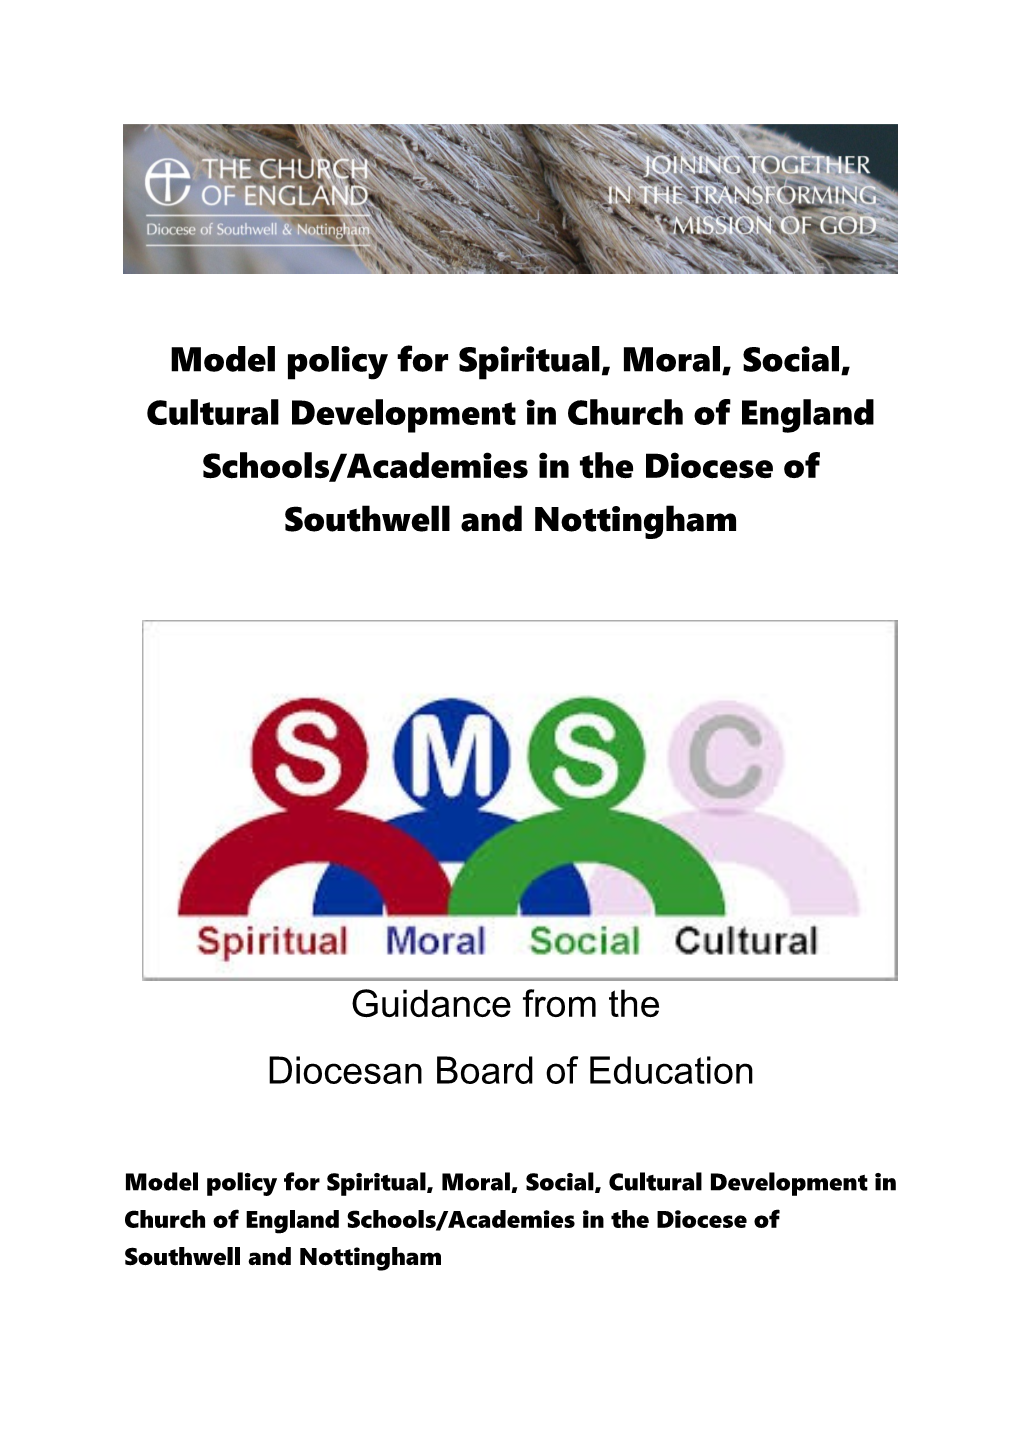 Model Policy for Spiritual, Moral, Social, Cultural Development in Church of England